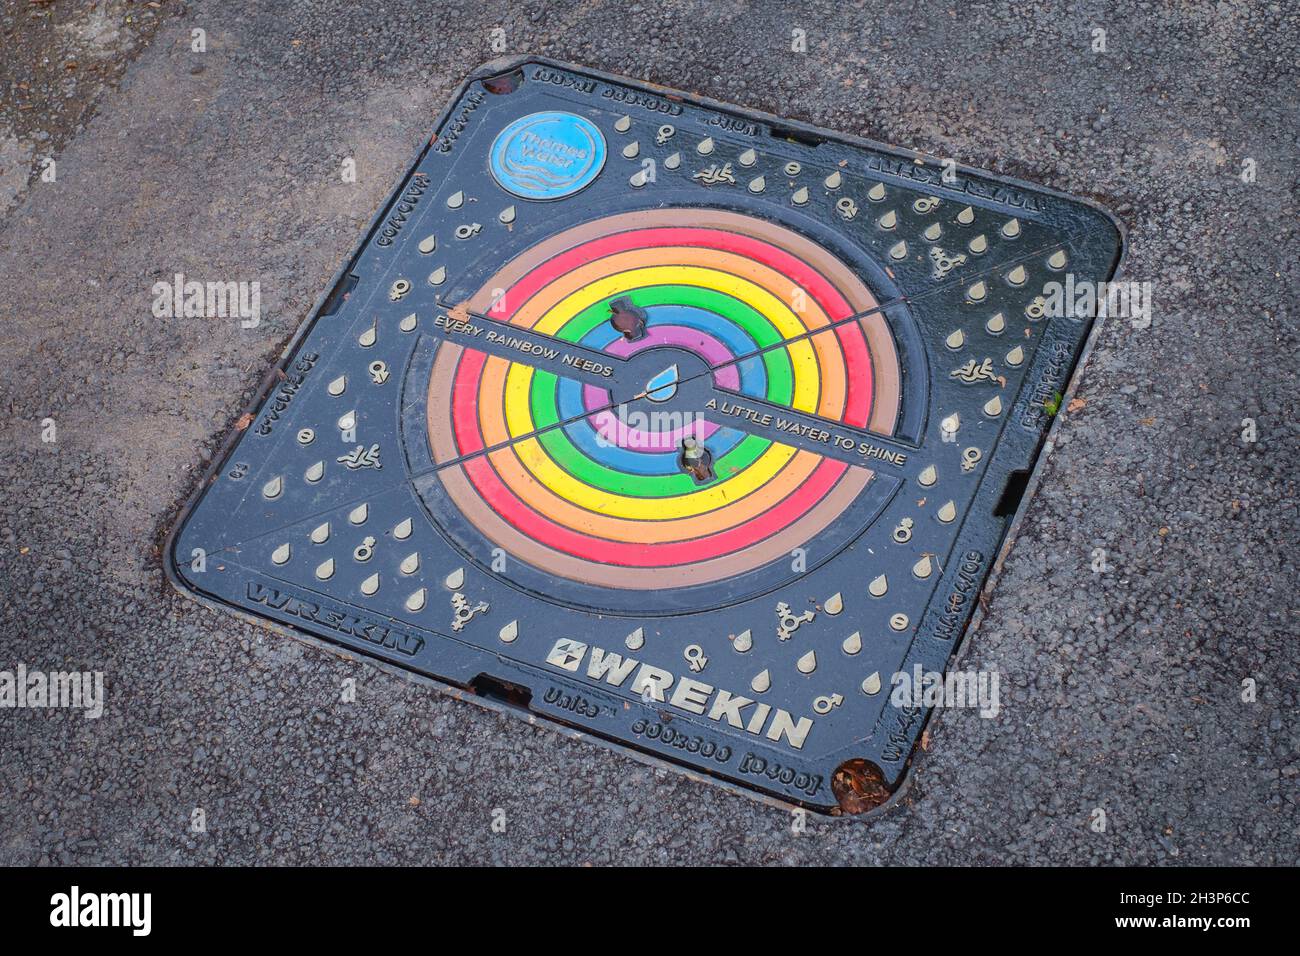 A special commemorative cast iron Thames Water 'Rainbow' manhole cover marked 'Every Rainbow needs a little water to shine' Stock Photo